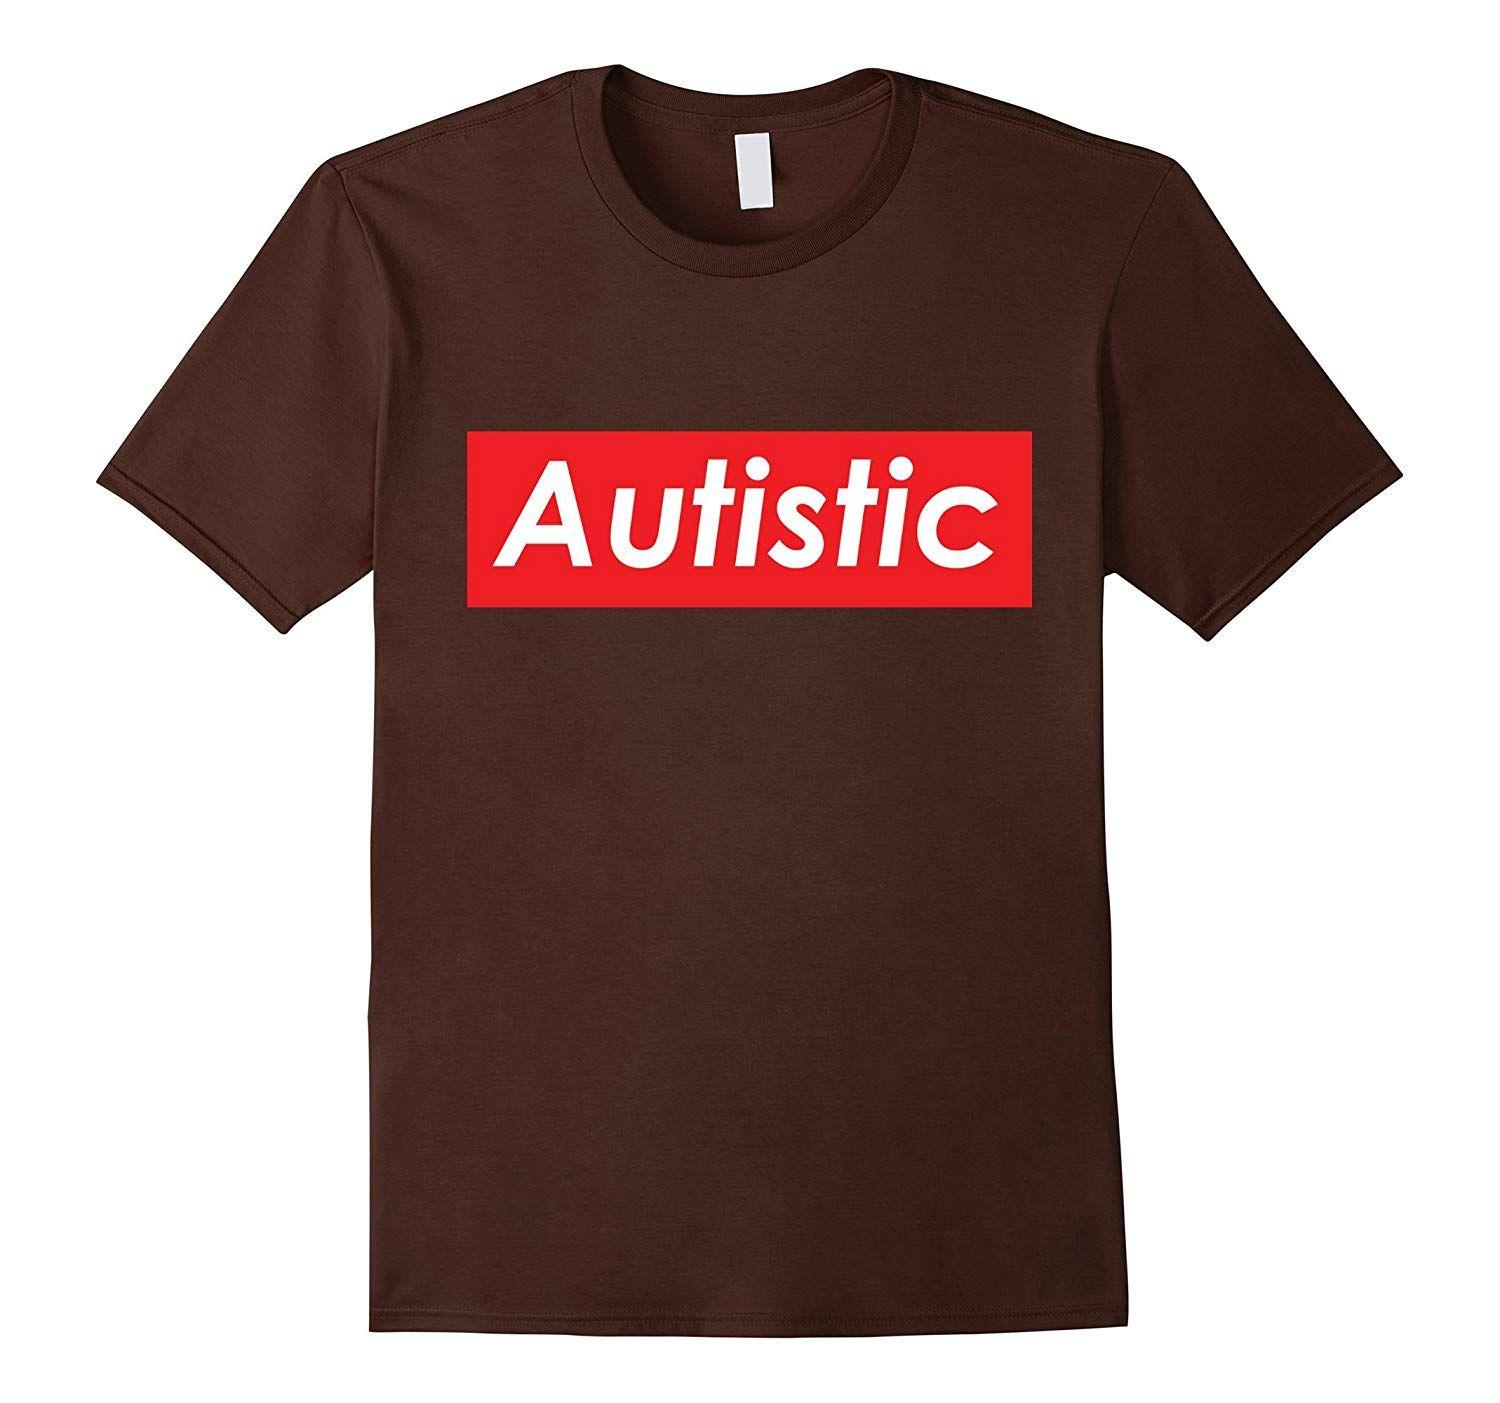 Red Box with White Letters Logo - Amazon.com: Autistic Red Box Logo White Letters - I'm Autistic Shirt ...